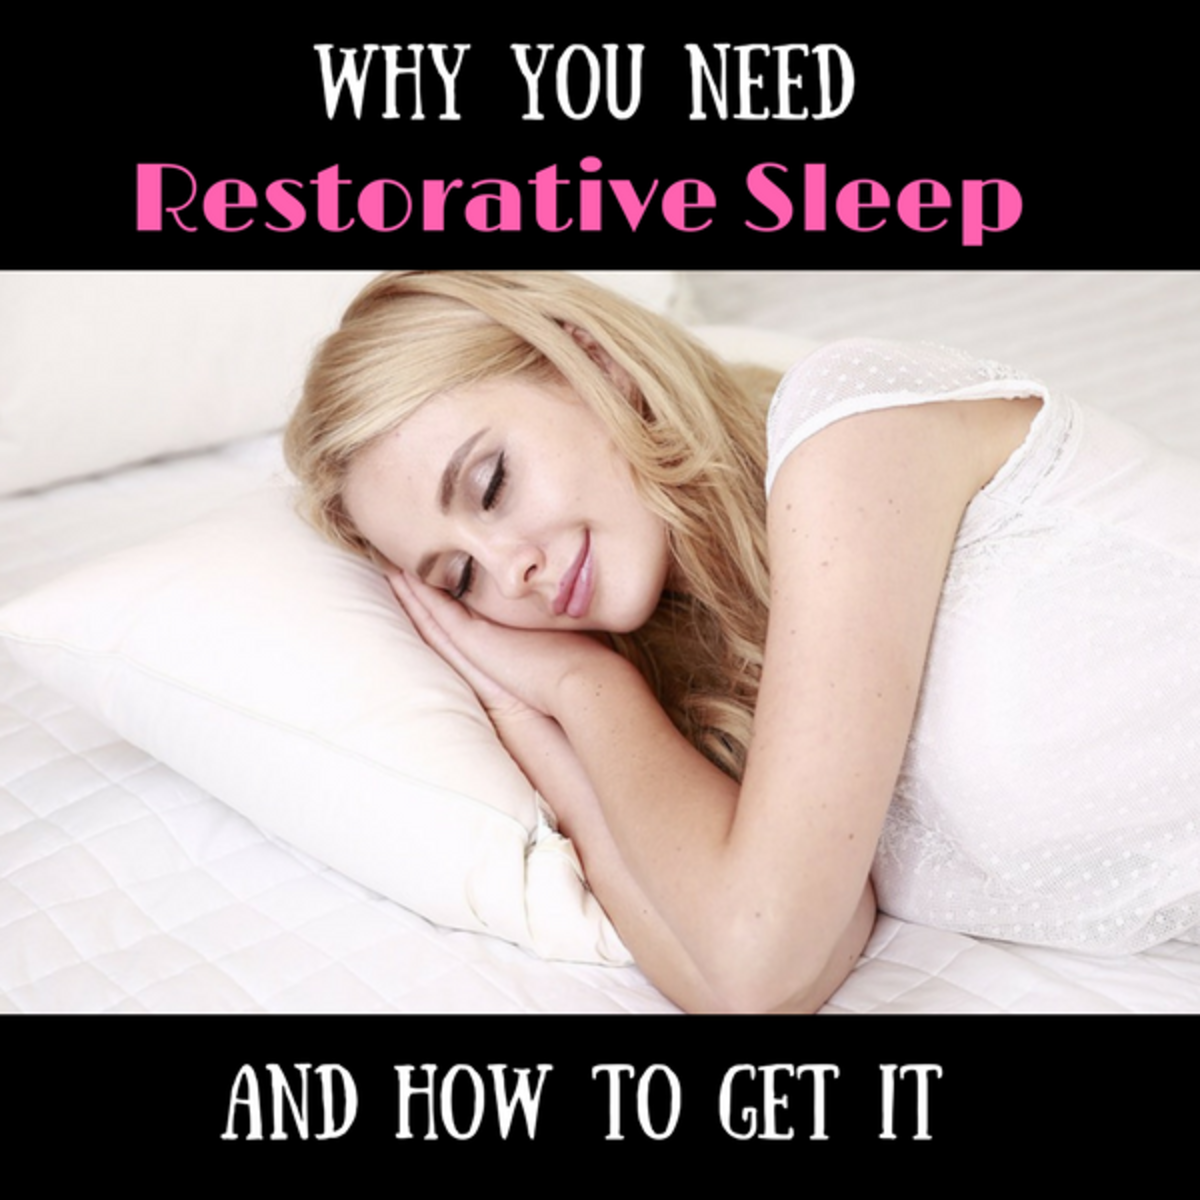 Why You Need Restorative Sleep and How to Get It